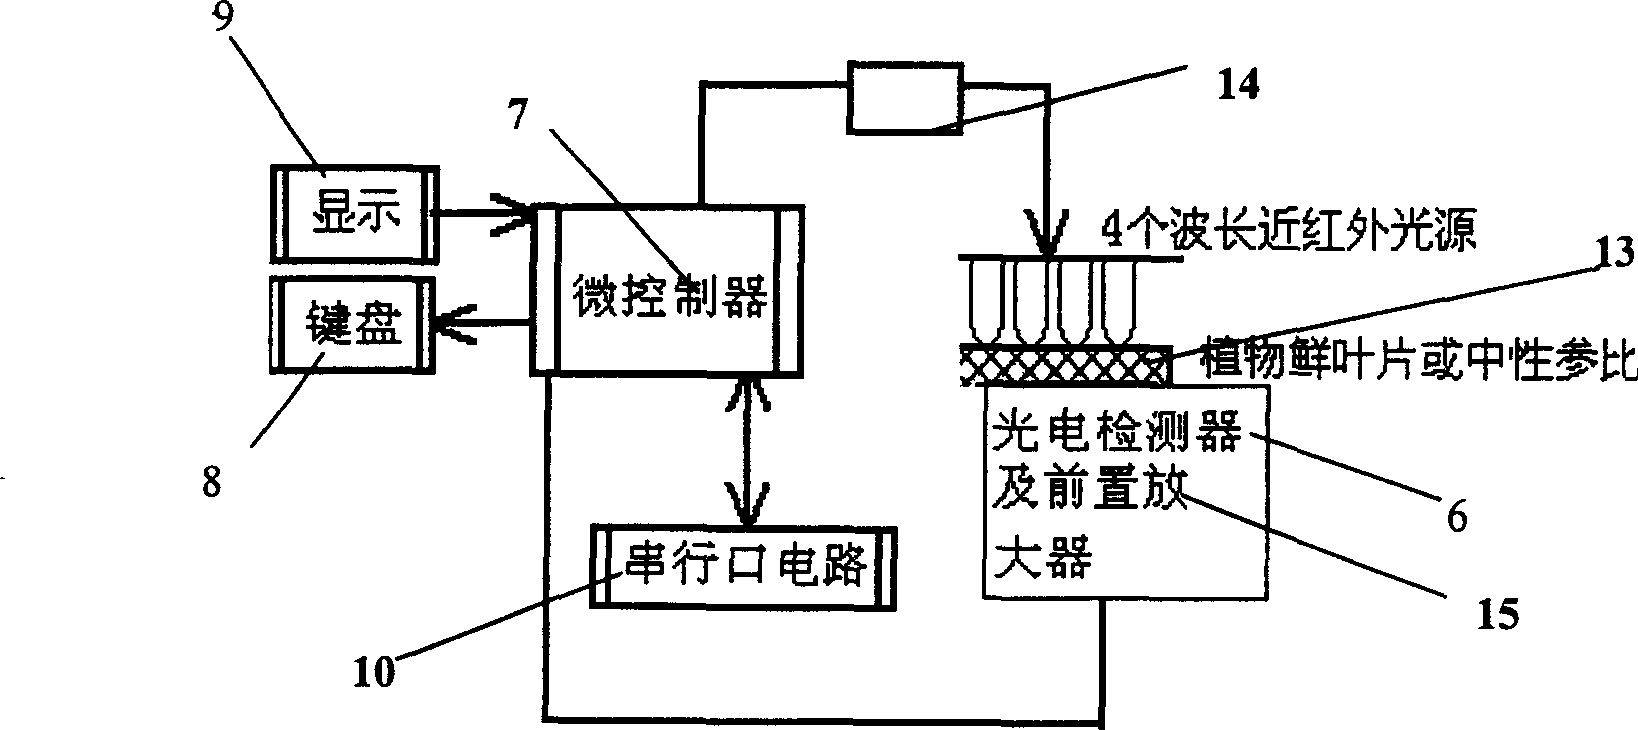 Non-destructive detecting method and detecting instrument for portable plant nitrogen and water content